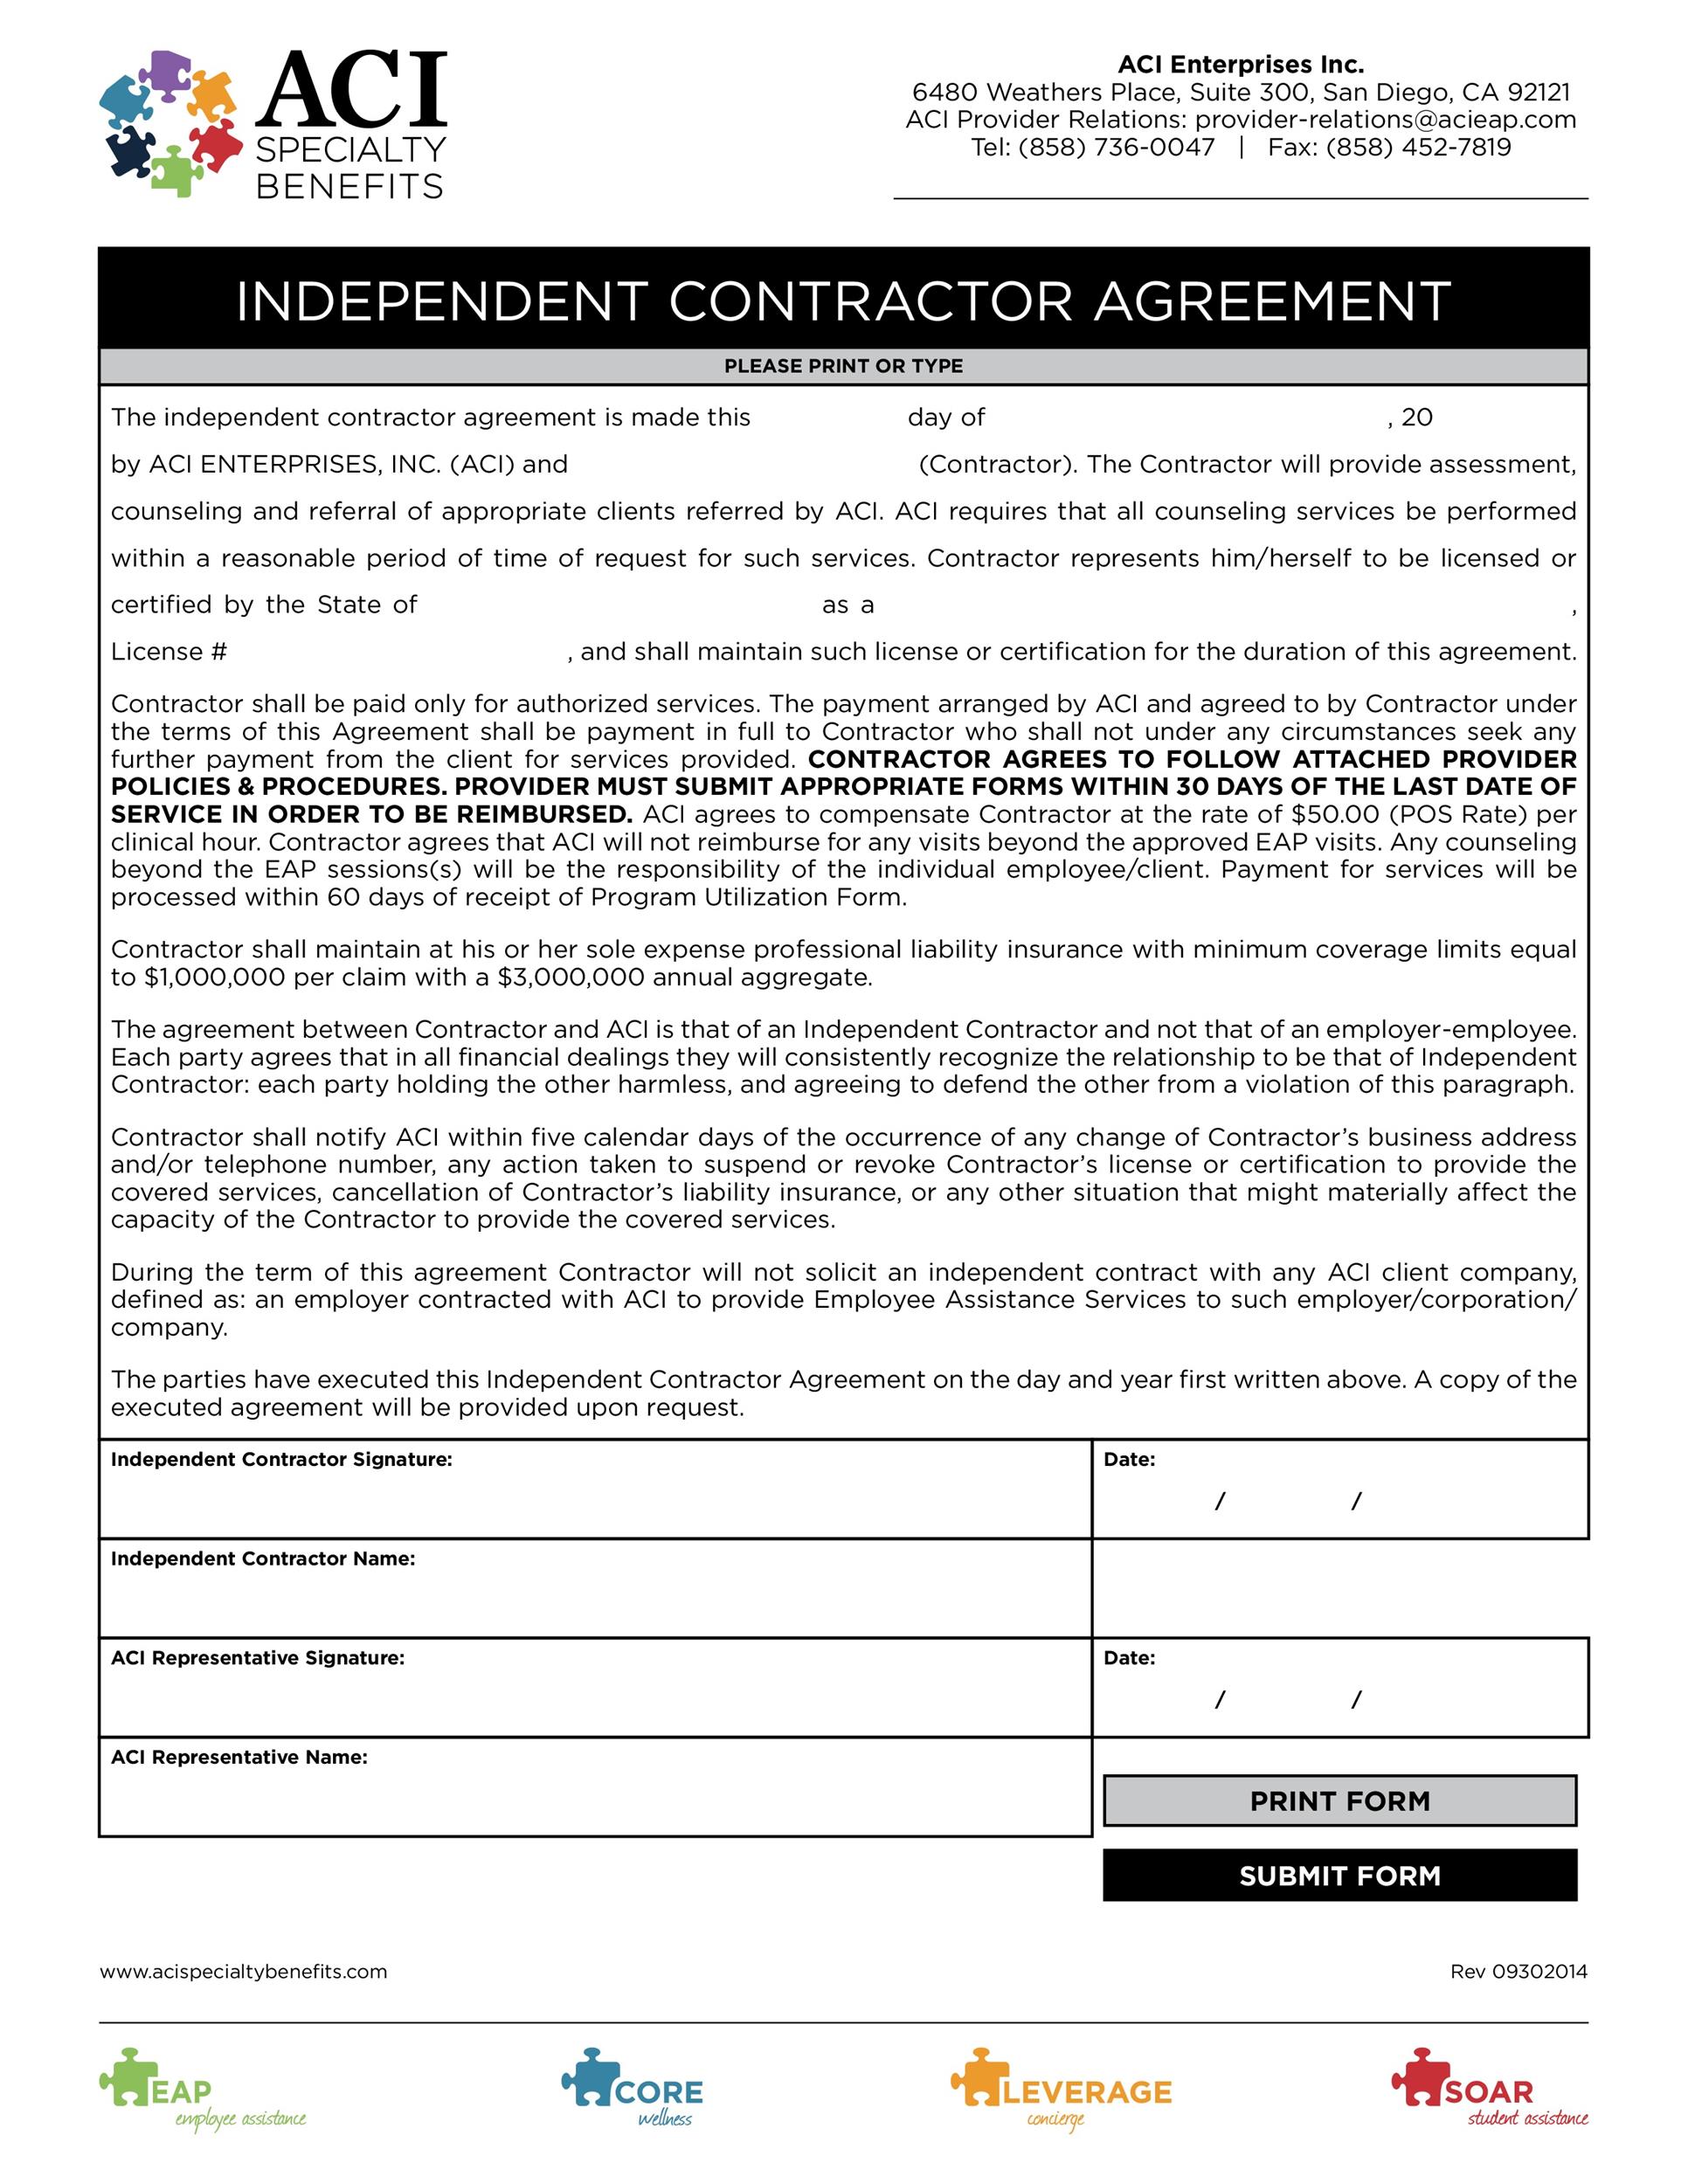 50 FREE Independent Contractor Agreement Forms Templates 30352 Hot